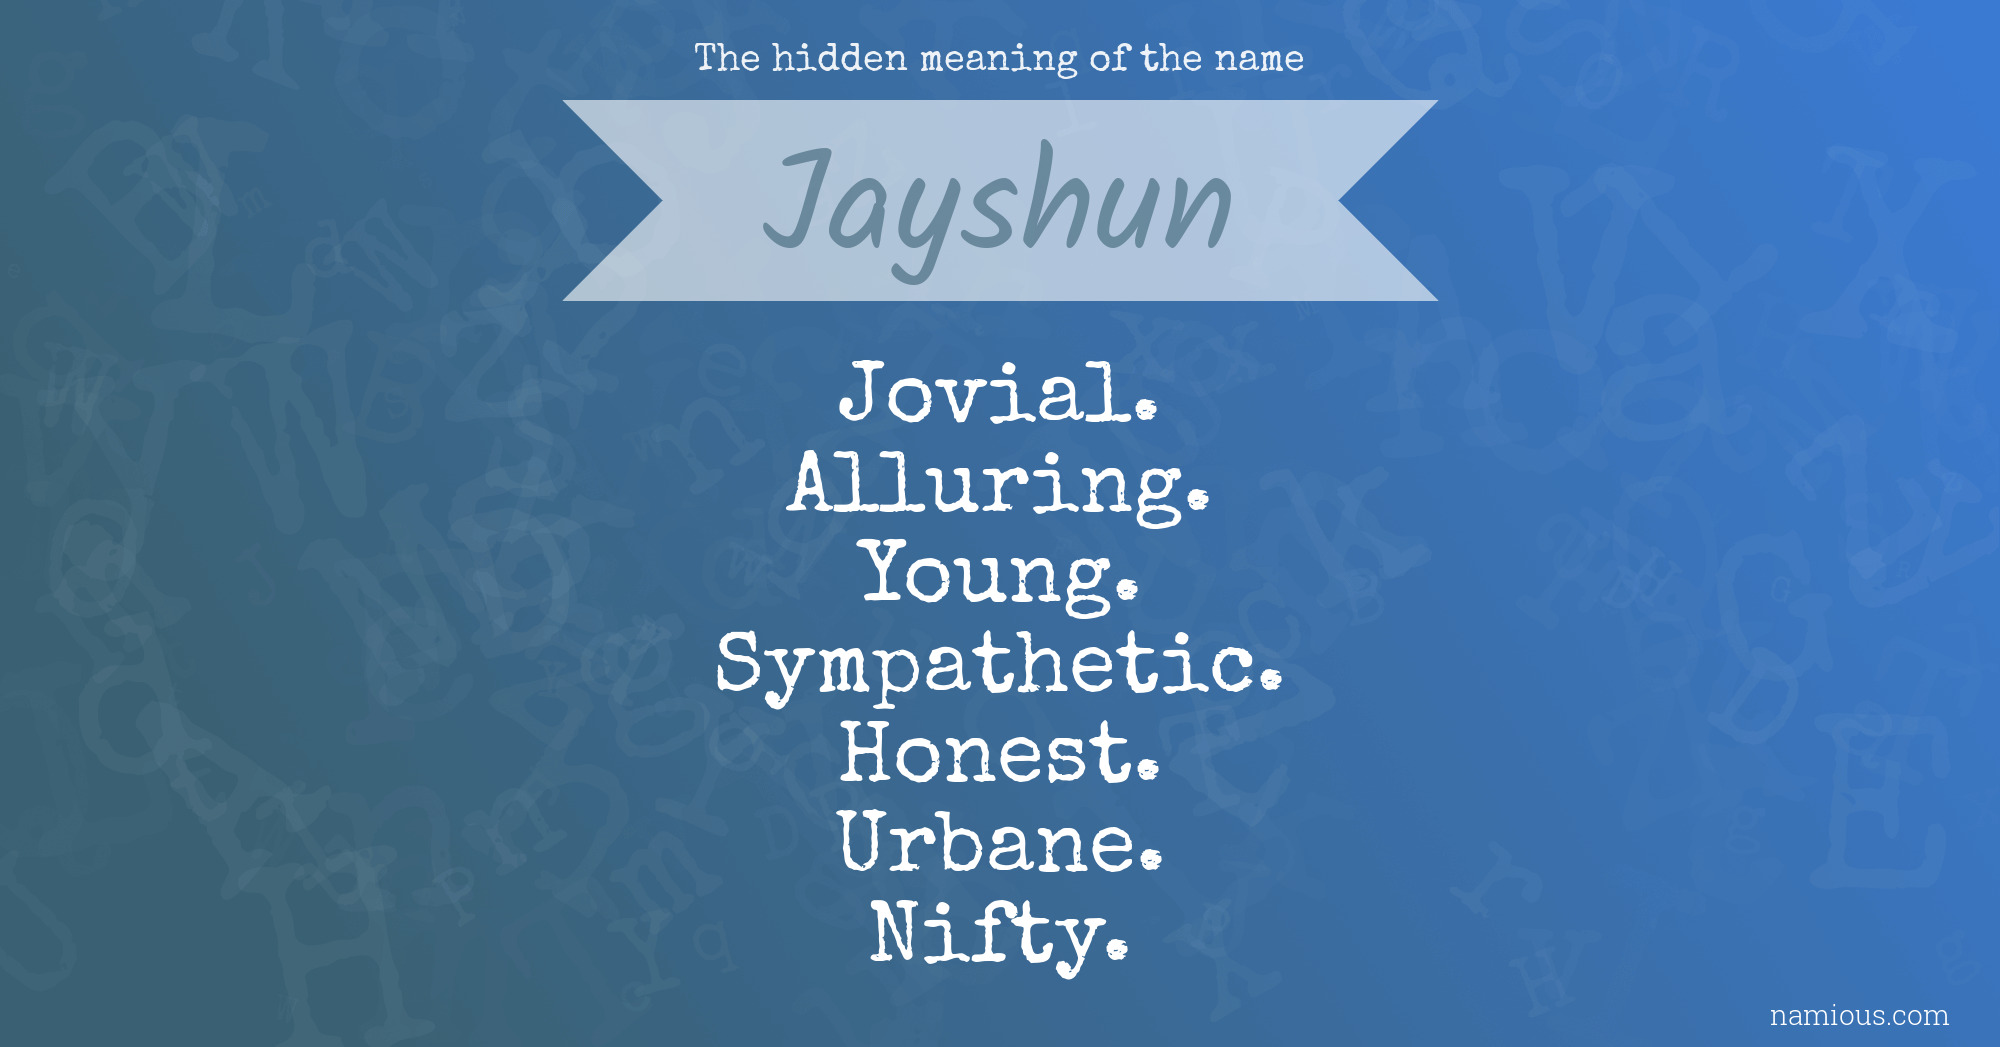 The hidden meaning of the name Jayshun